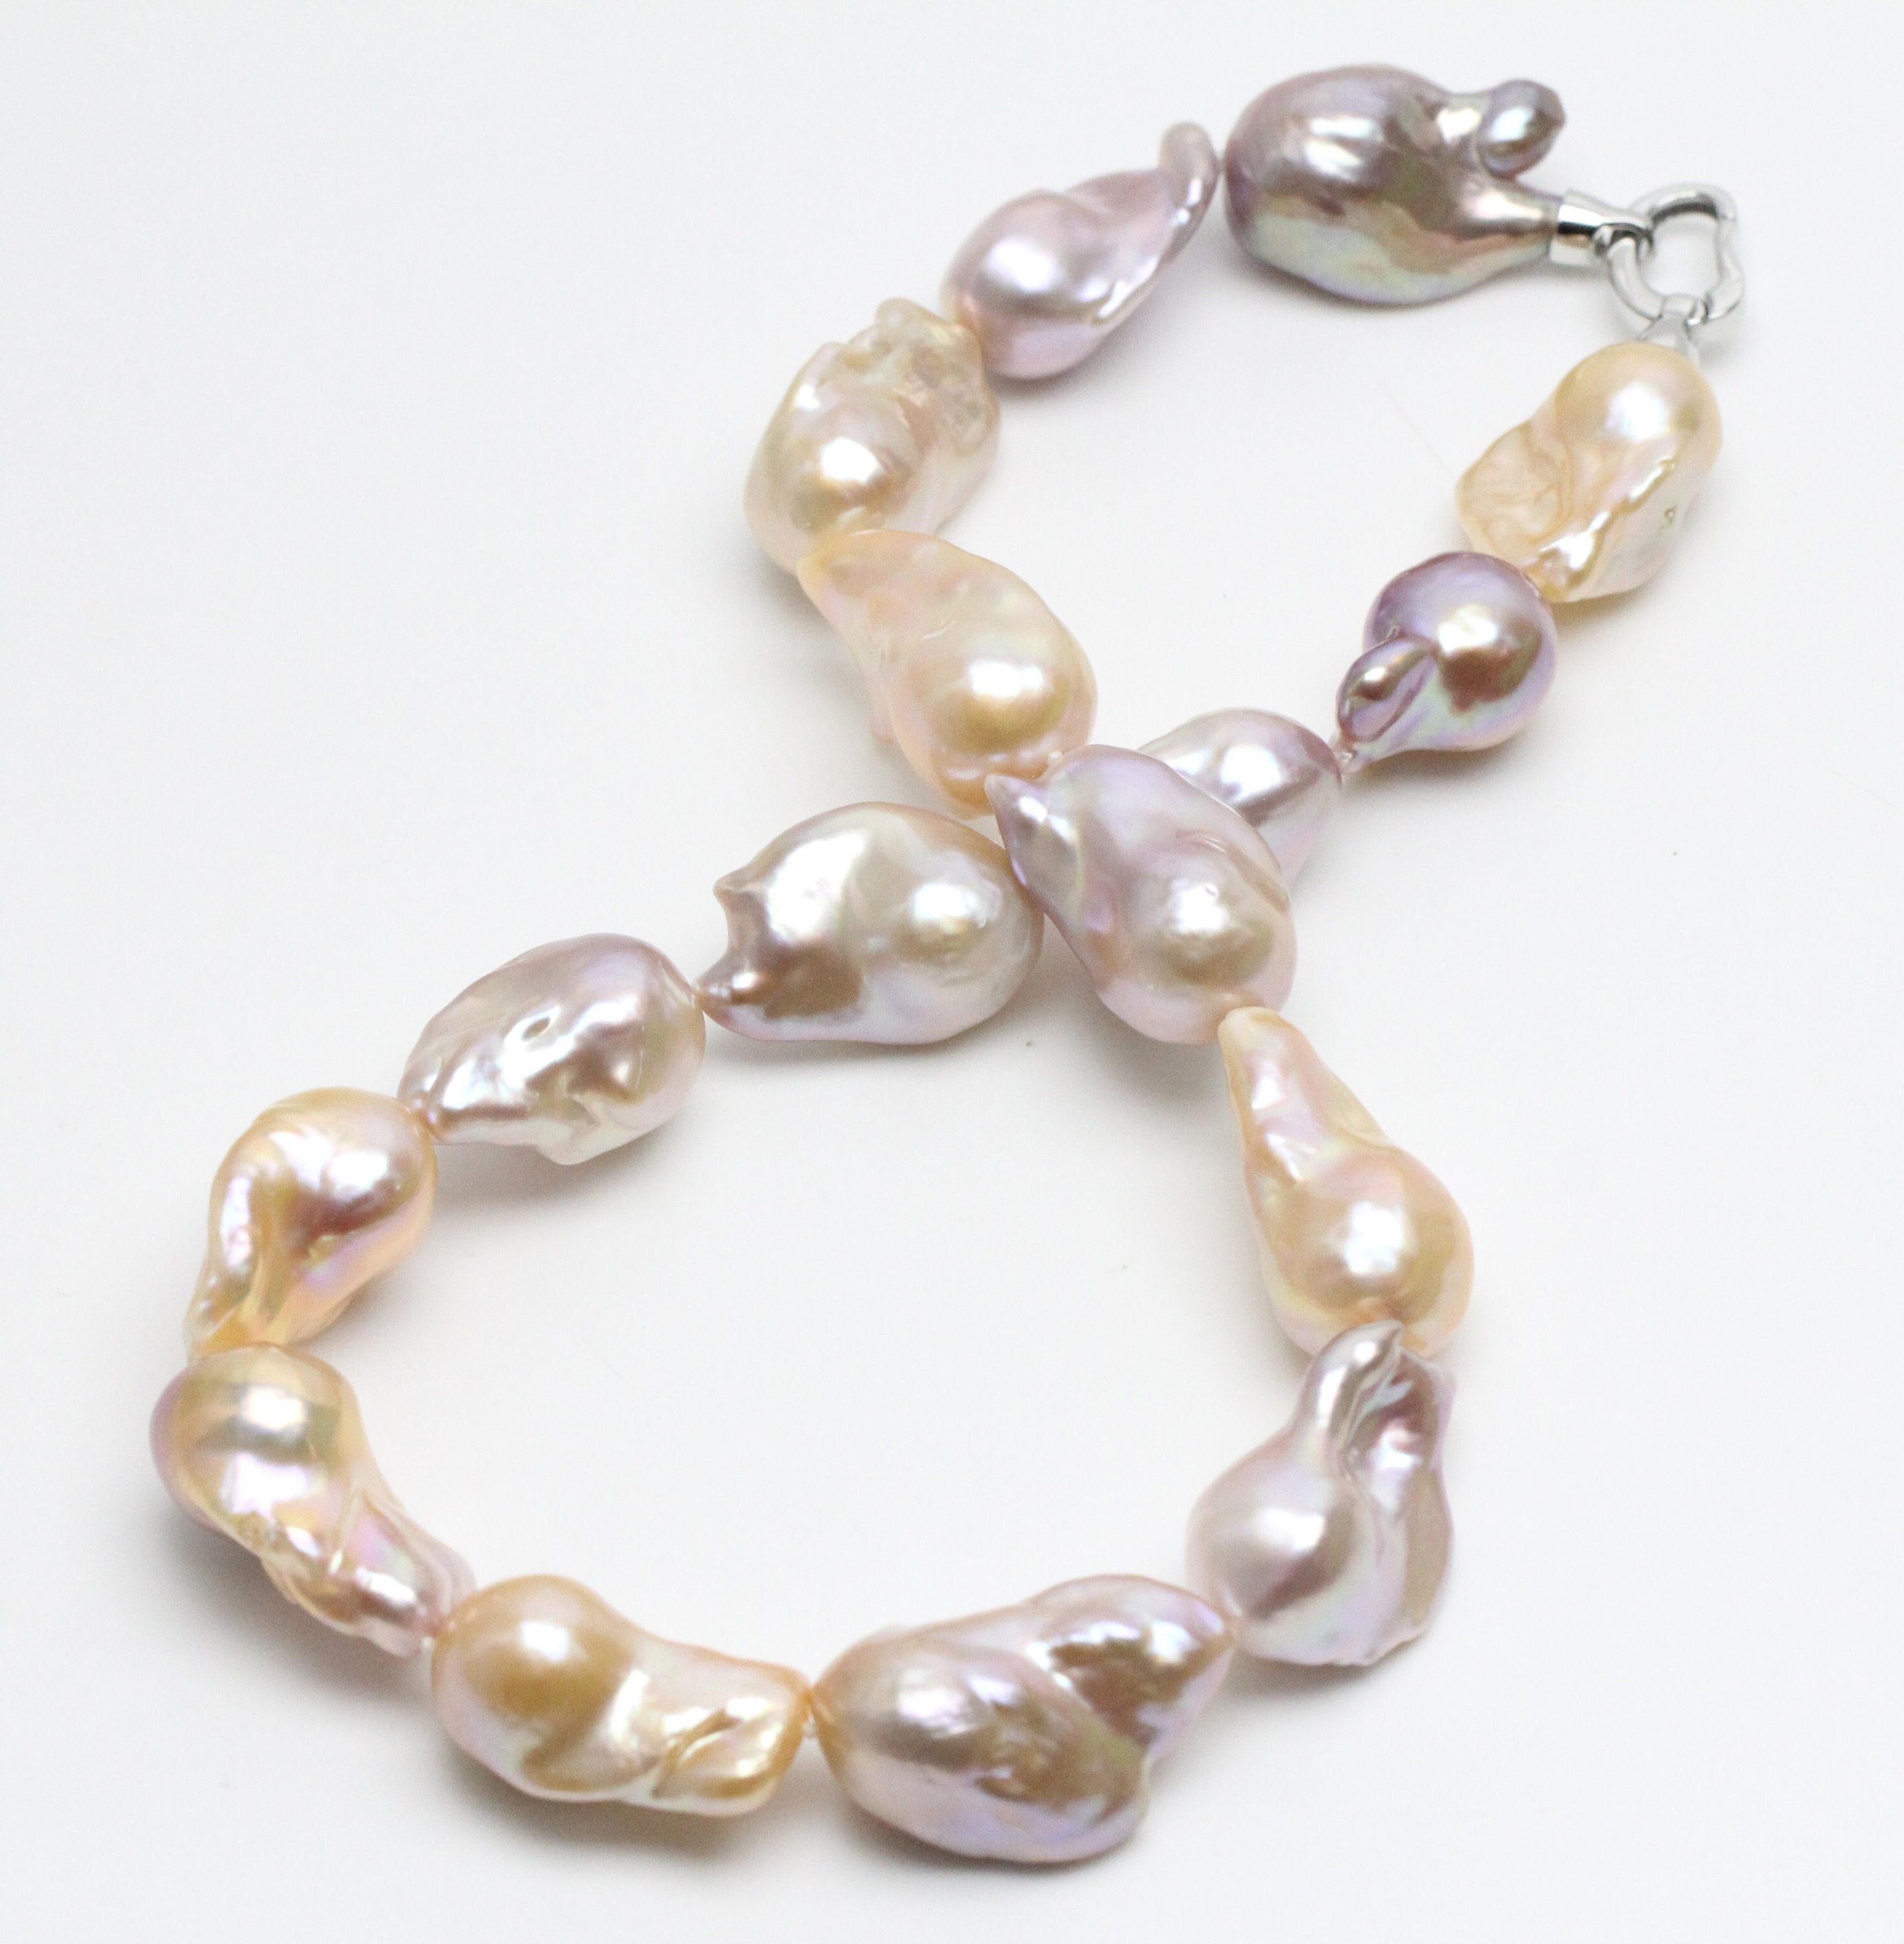 18mm-25mm Huge Sized Baroque Pearl Strands with High Luster and Nice Shape